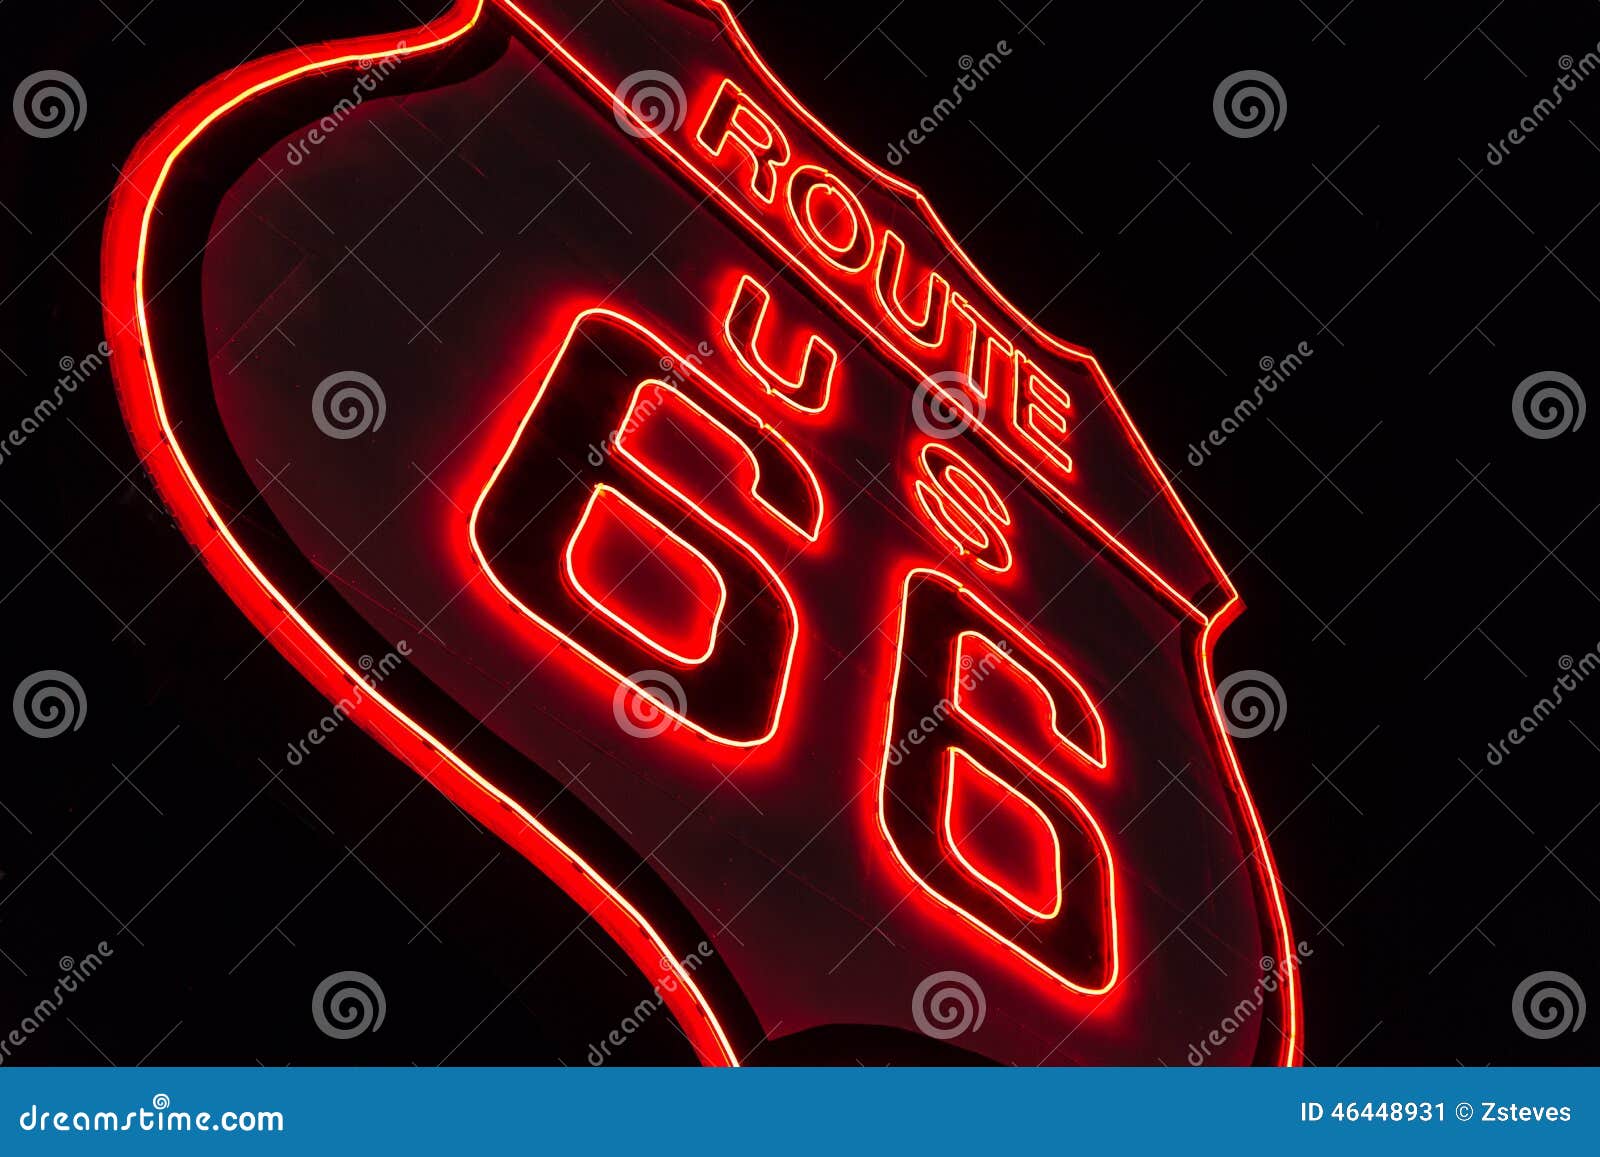 route 66 neon sign